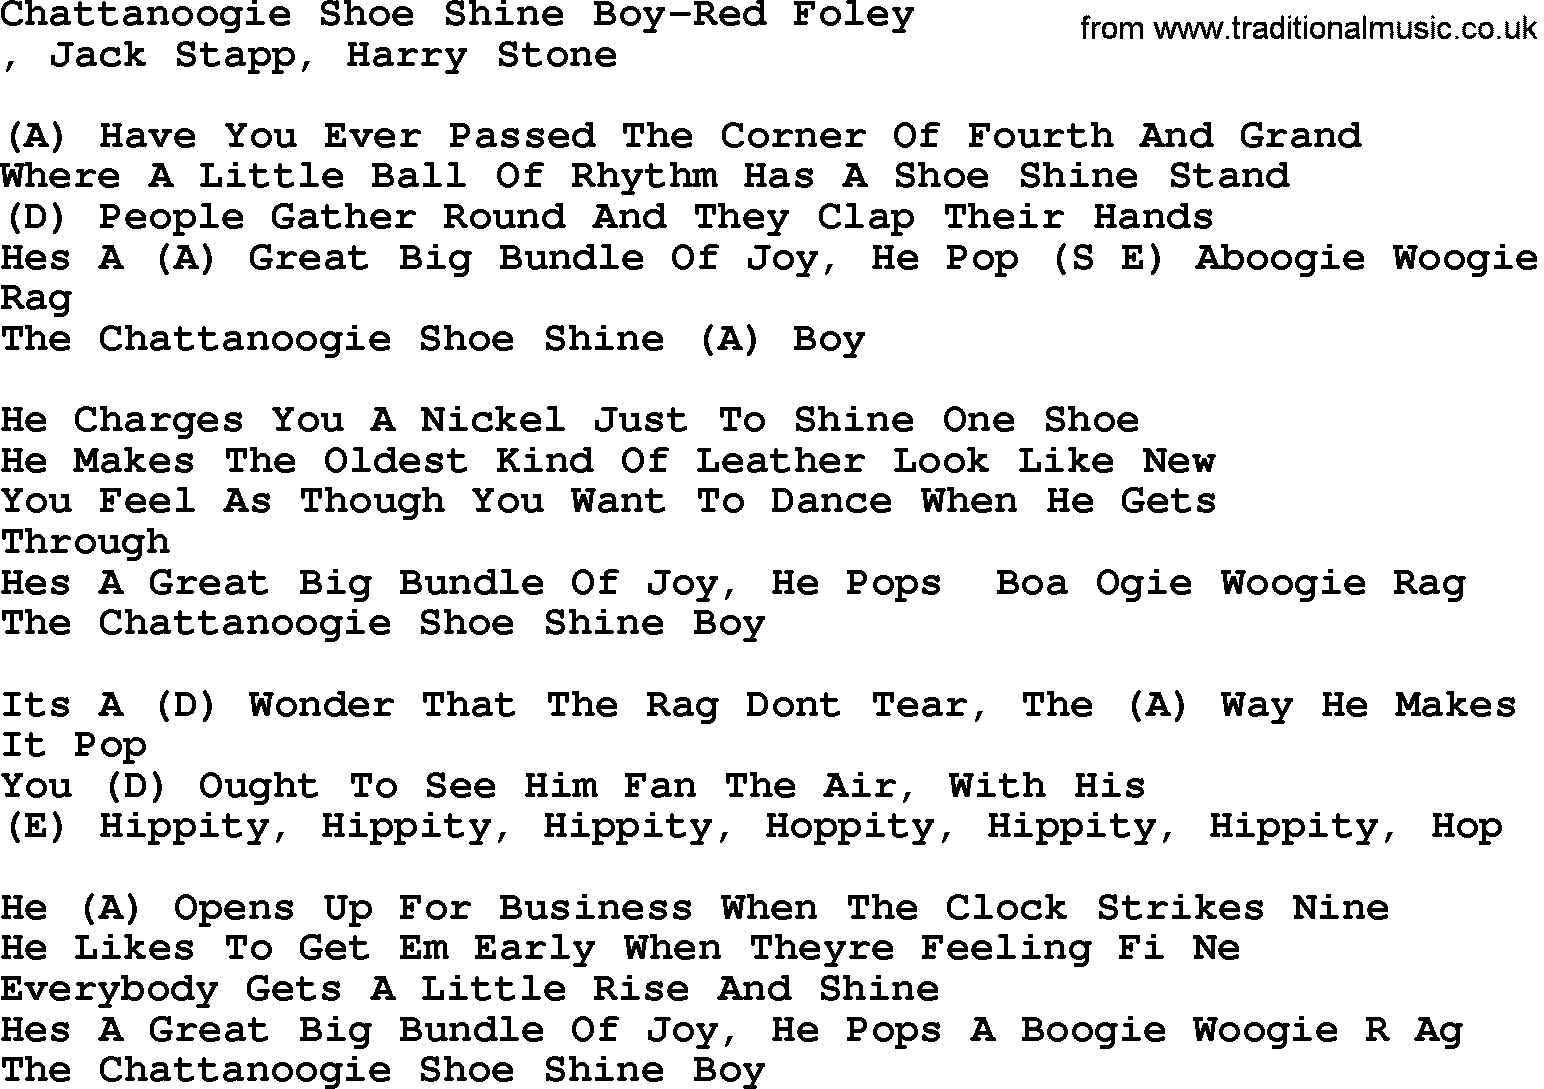 Country music song: Chattanoogie Shoe Shine Boy-Red Foley lyrics and chords